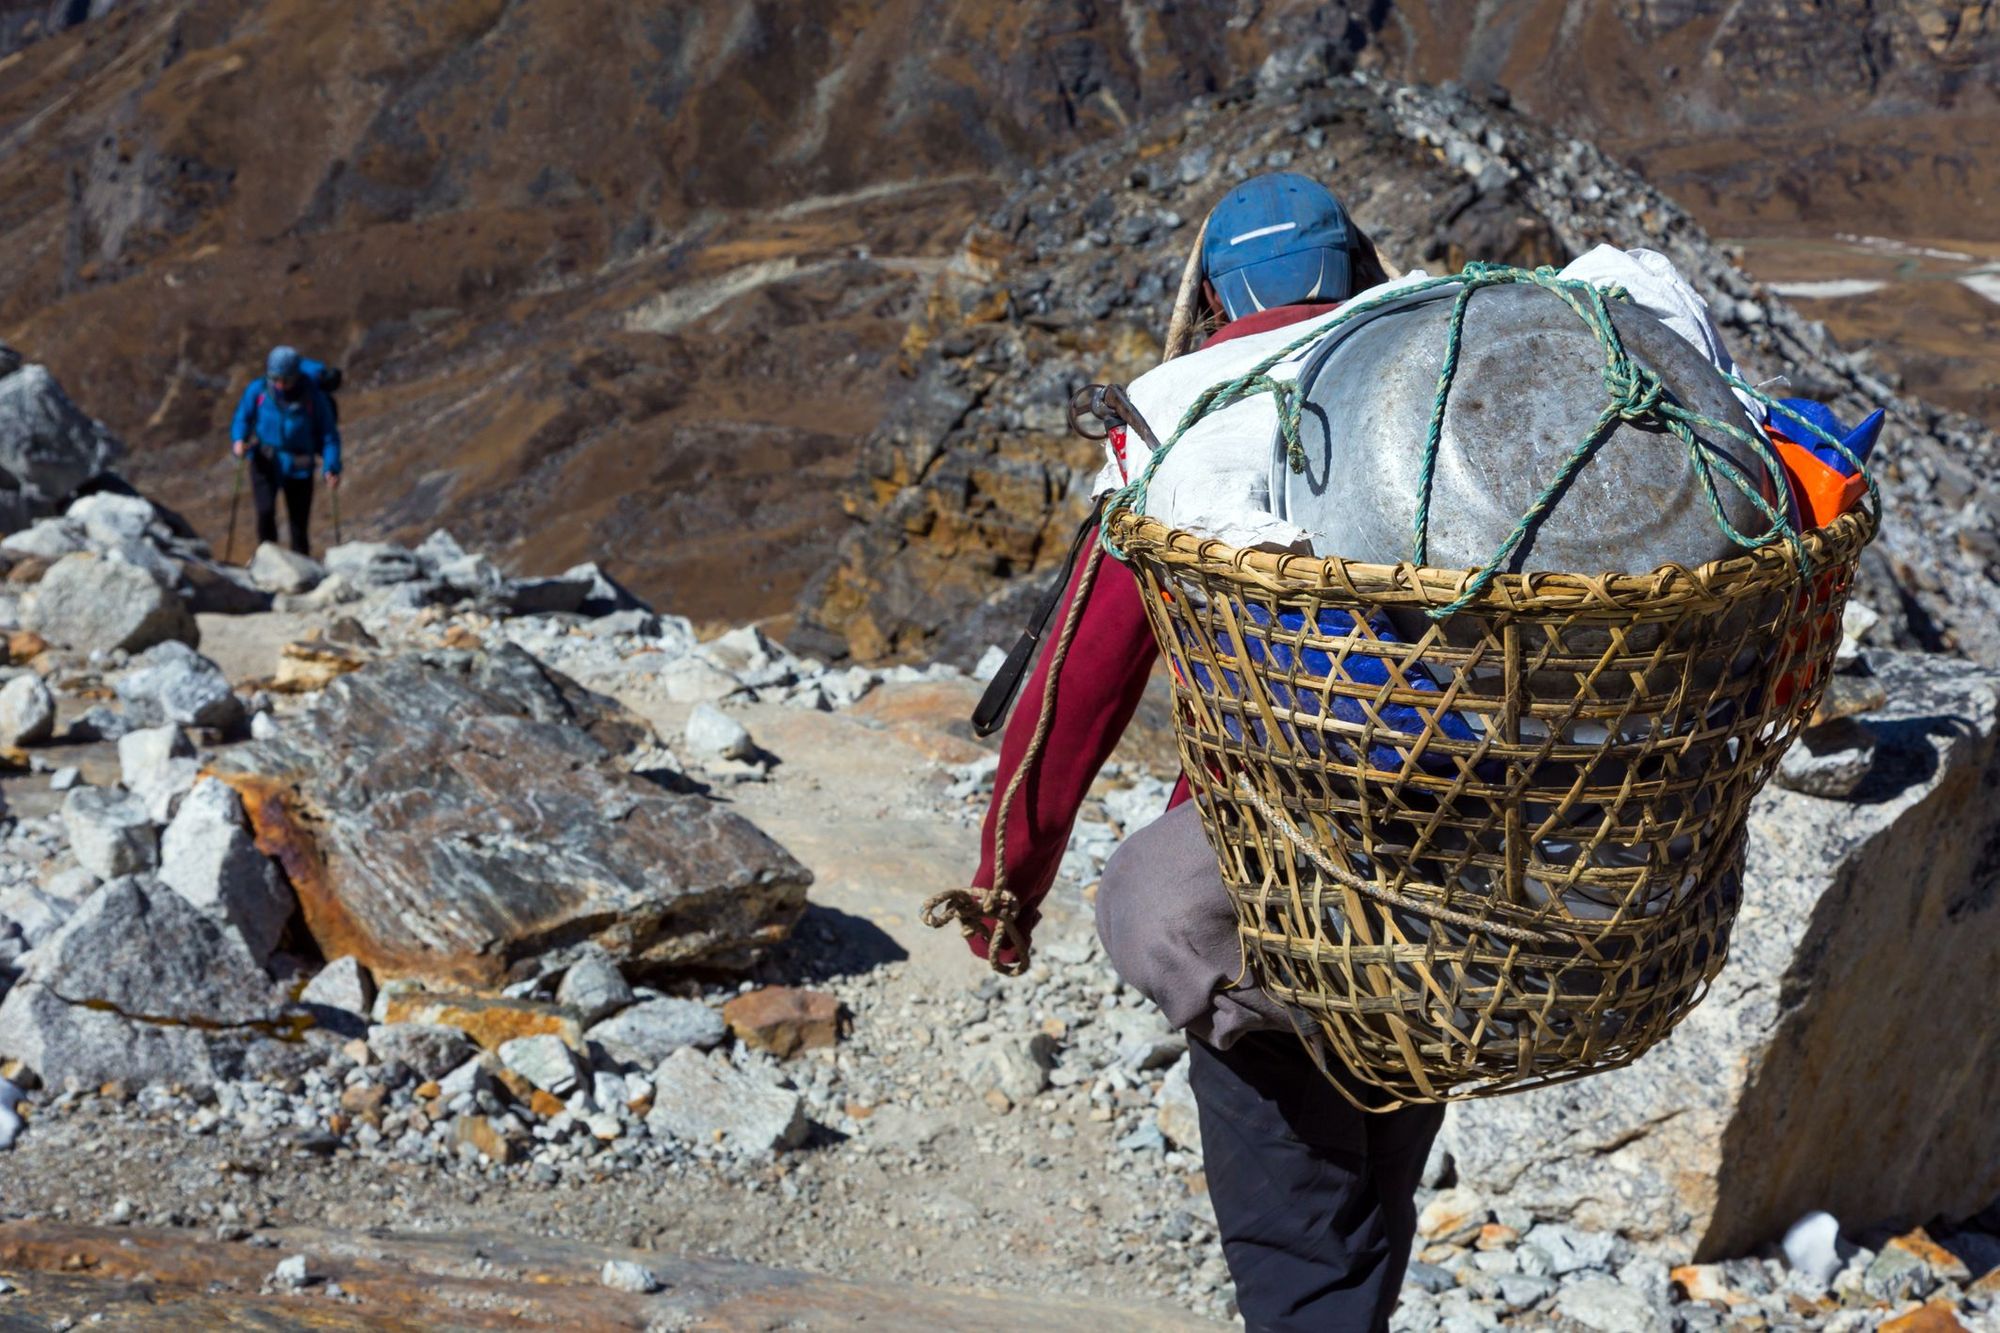 A Nepalese porter carrying cooking equipment on a trek. Photo: Getty.